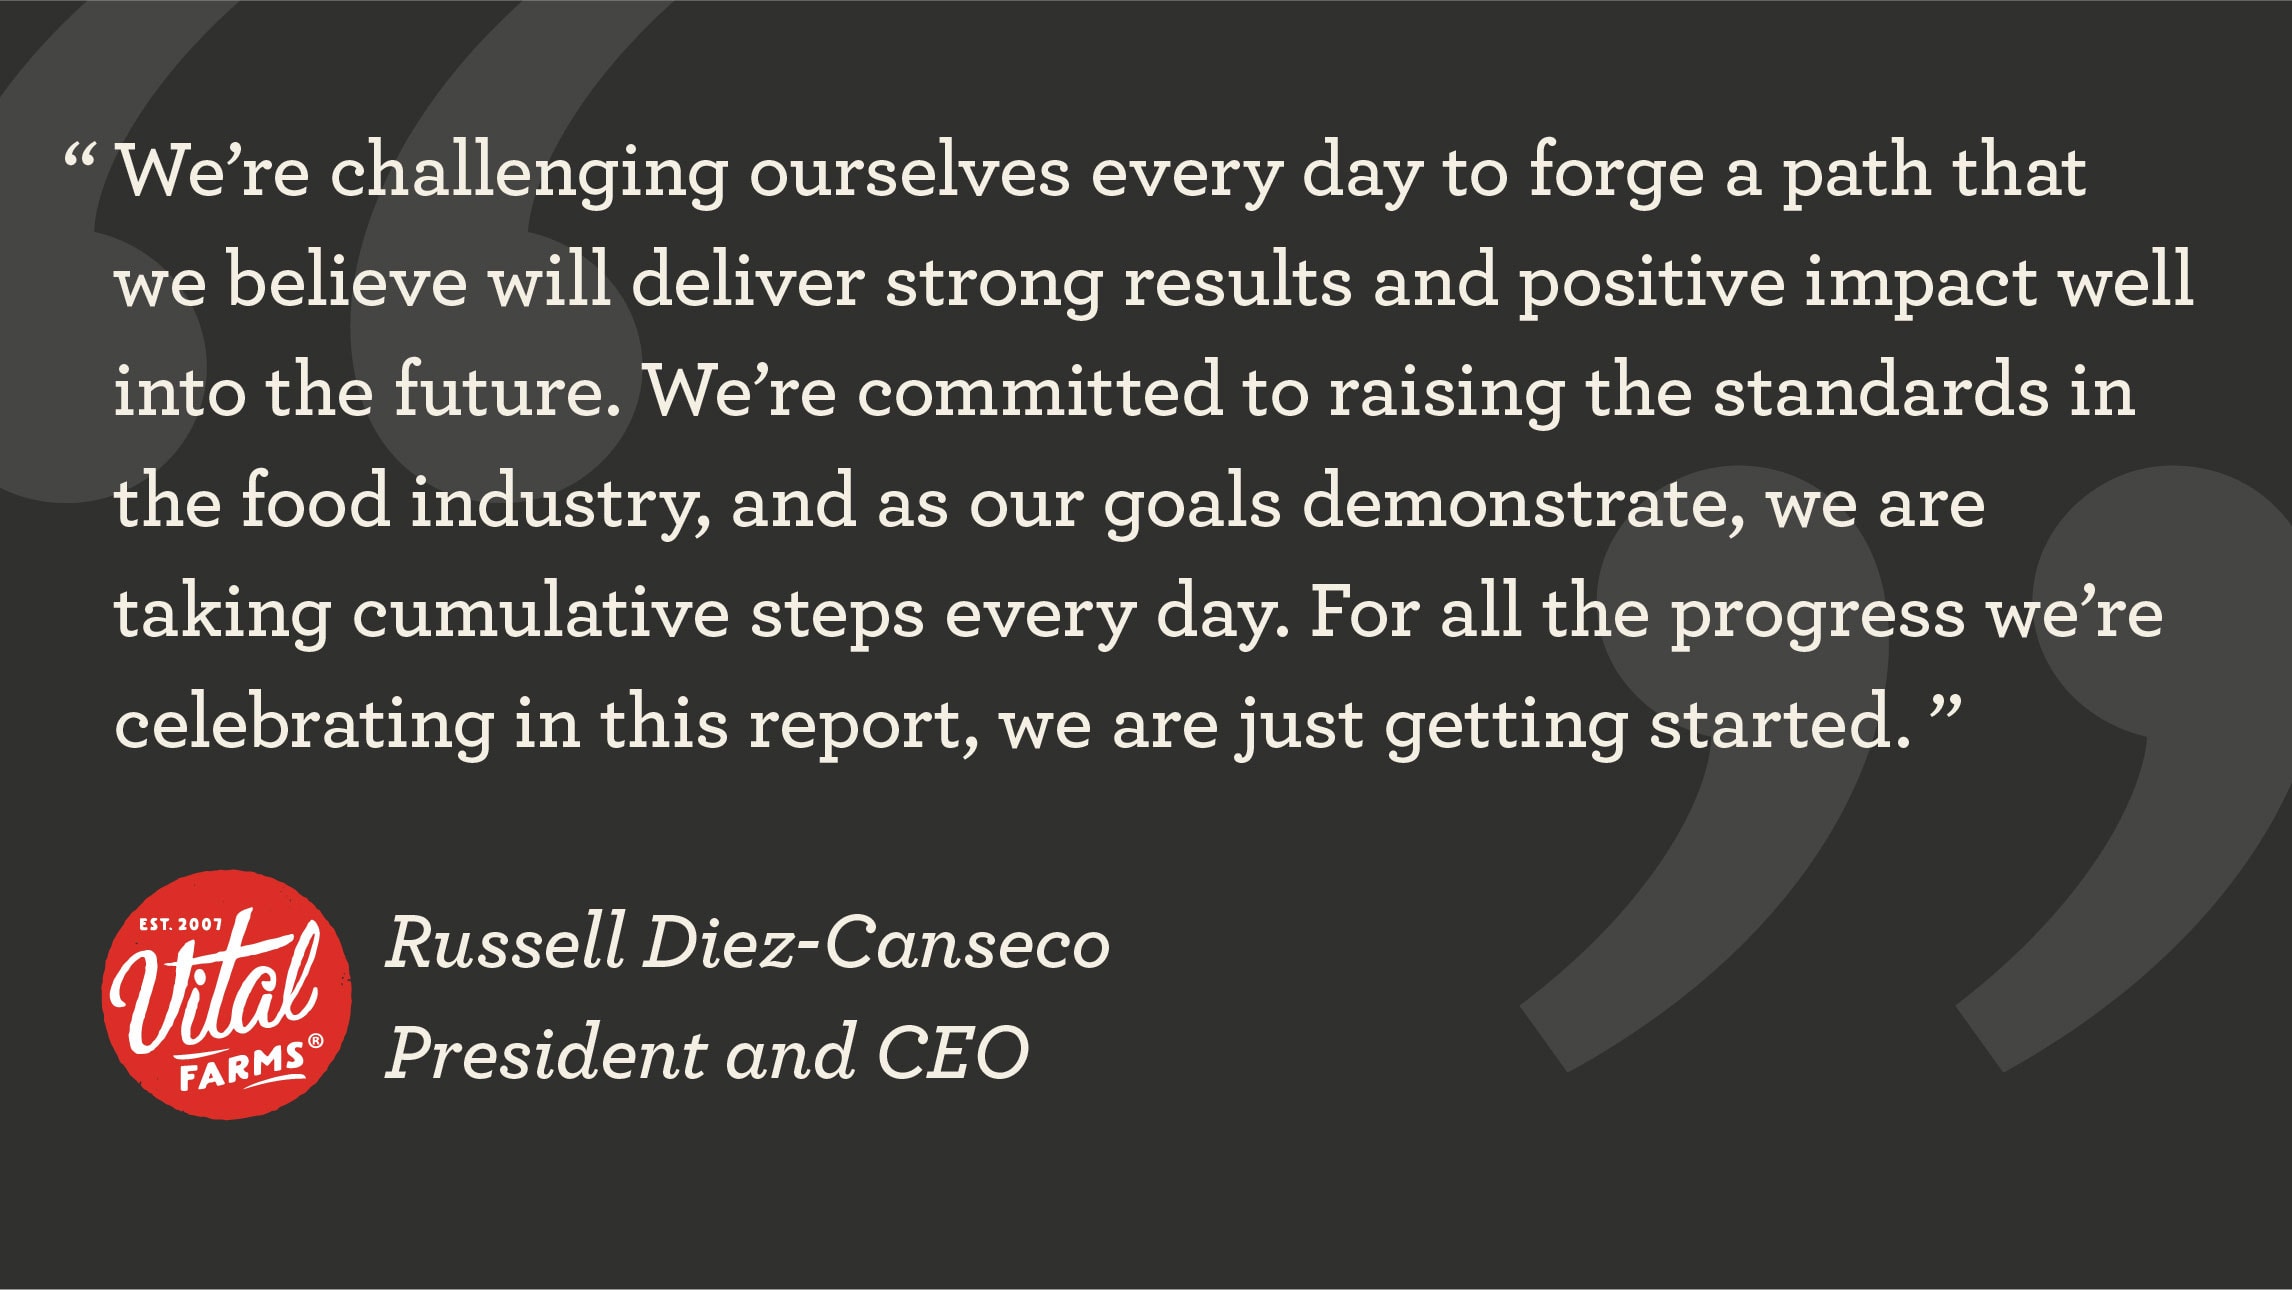 We’re challenging ourselves every day to forge a path that we believe will deliver strong results and positive impact well into the future. We’re committed to raising the standards in the food industry, and as our goals demonstrate, we are taking cumulative steps every day. For all the progress we’re celebrating in this report, we are just getting started. ” - Russell Diez-Canseco, President and CEO